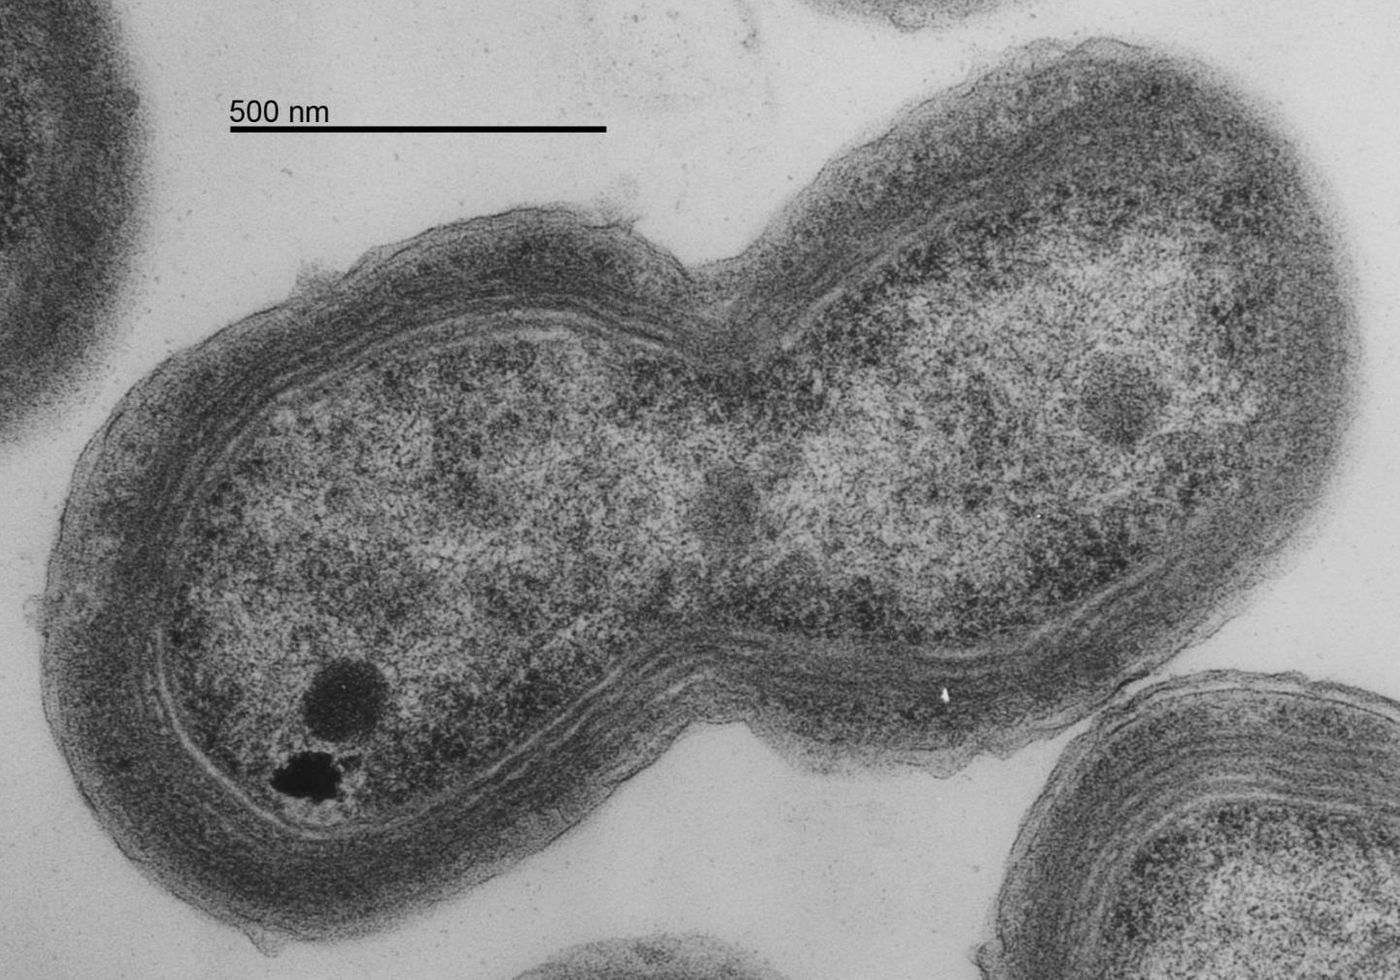 Credit: This is Prochlorococcus MED4 EM dividing. Taken by Luke Thompson (Chisholm Lab, MIT) and Nicki Watson (Whitehead Institute), 2006. TEM of MED4